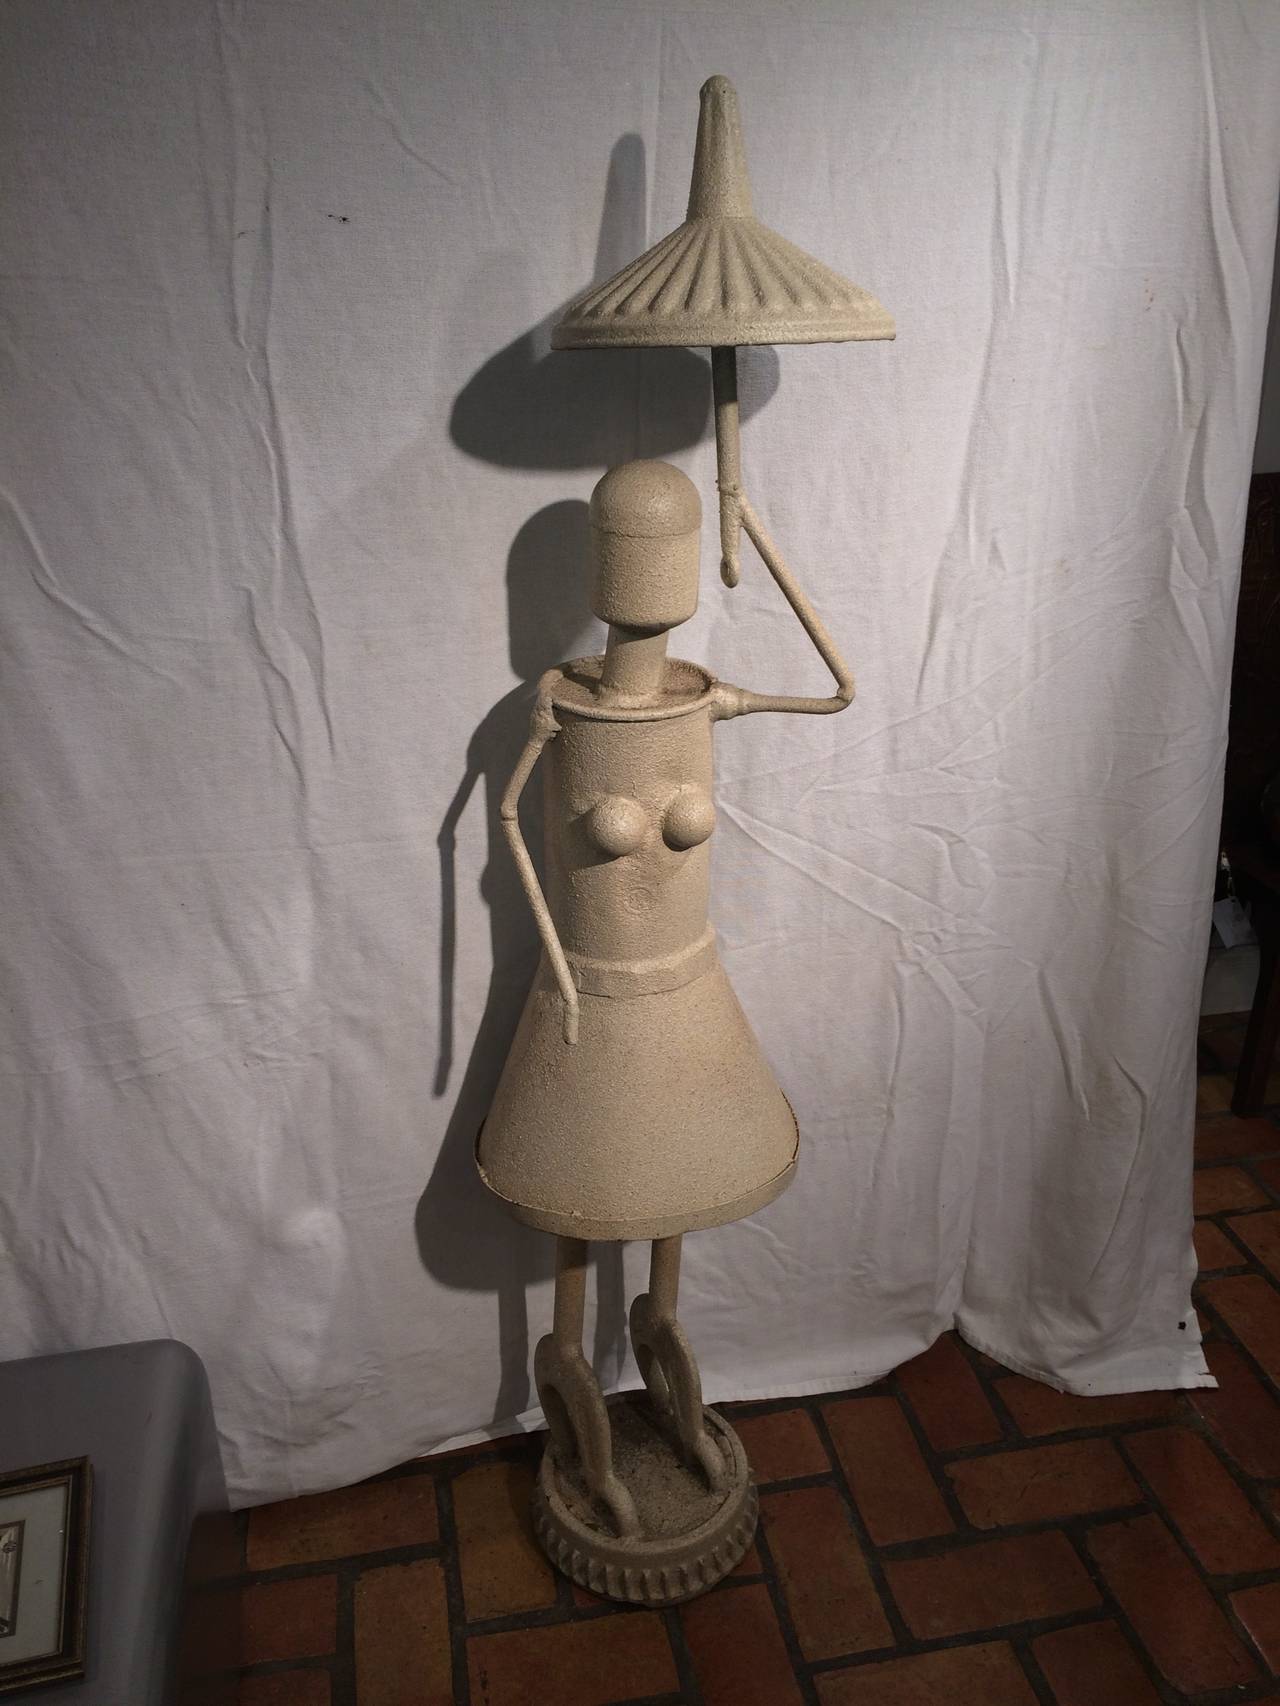 Lifesize  Sculpture of a Woman by artist Jon Westberg. This stunnning Industrial sculpture of a woman with umbrella is entitled 